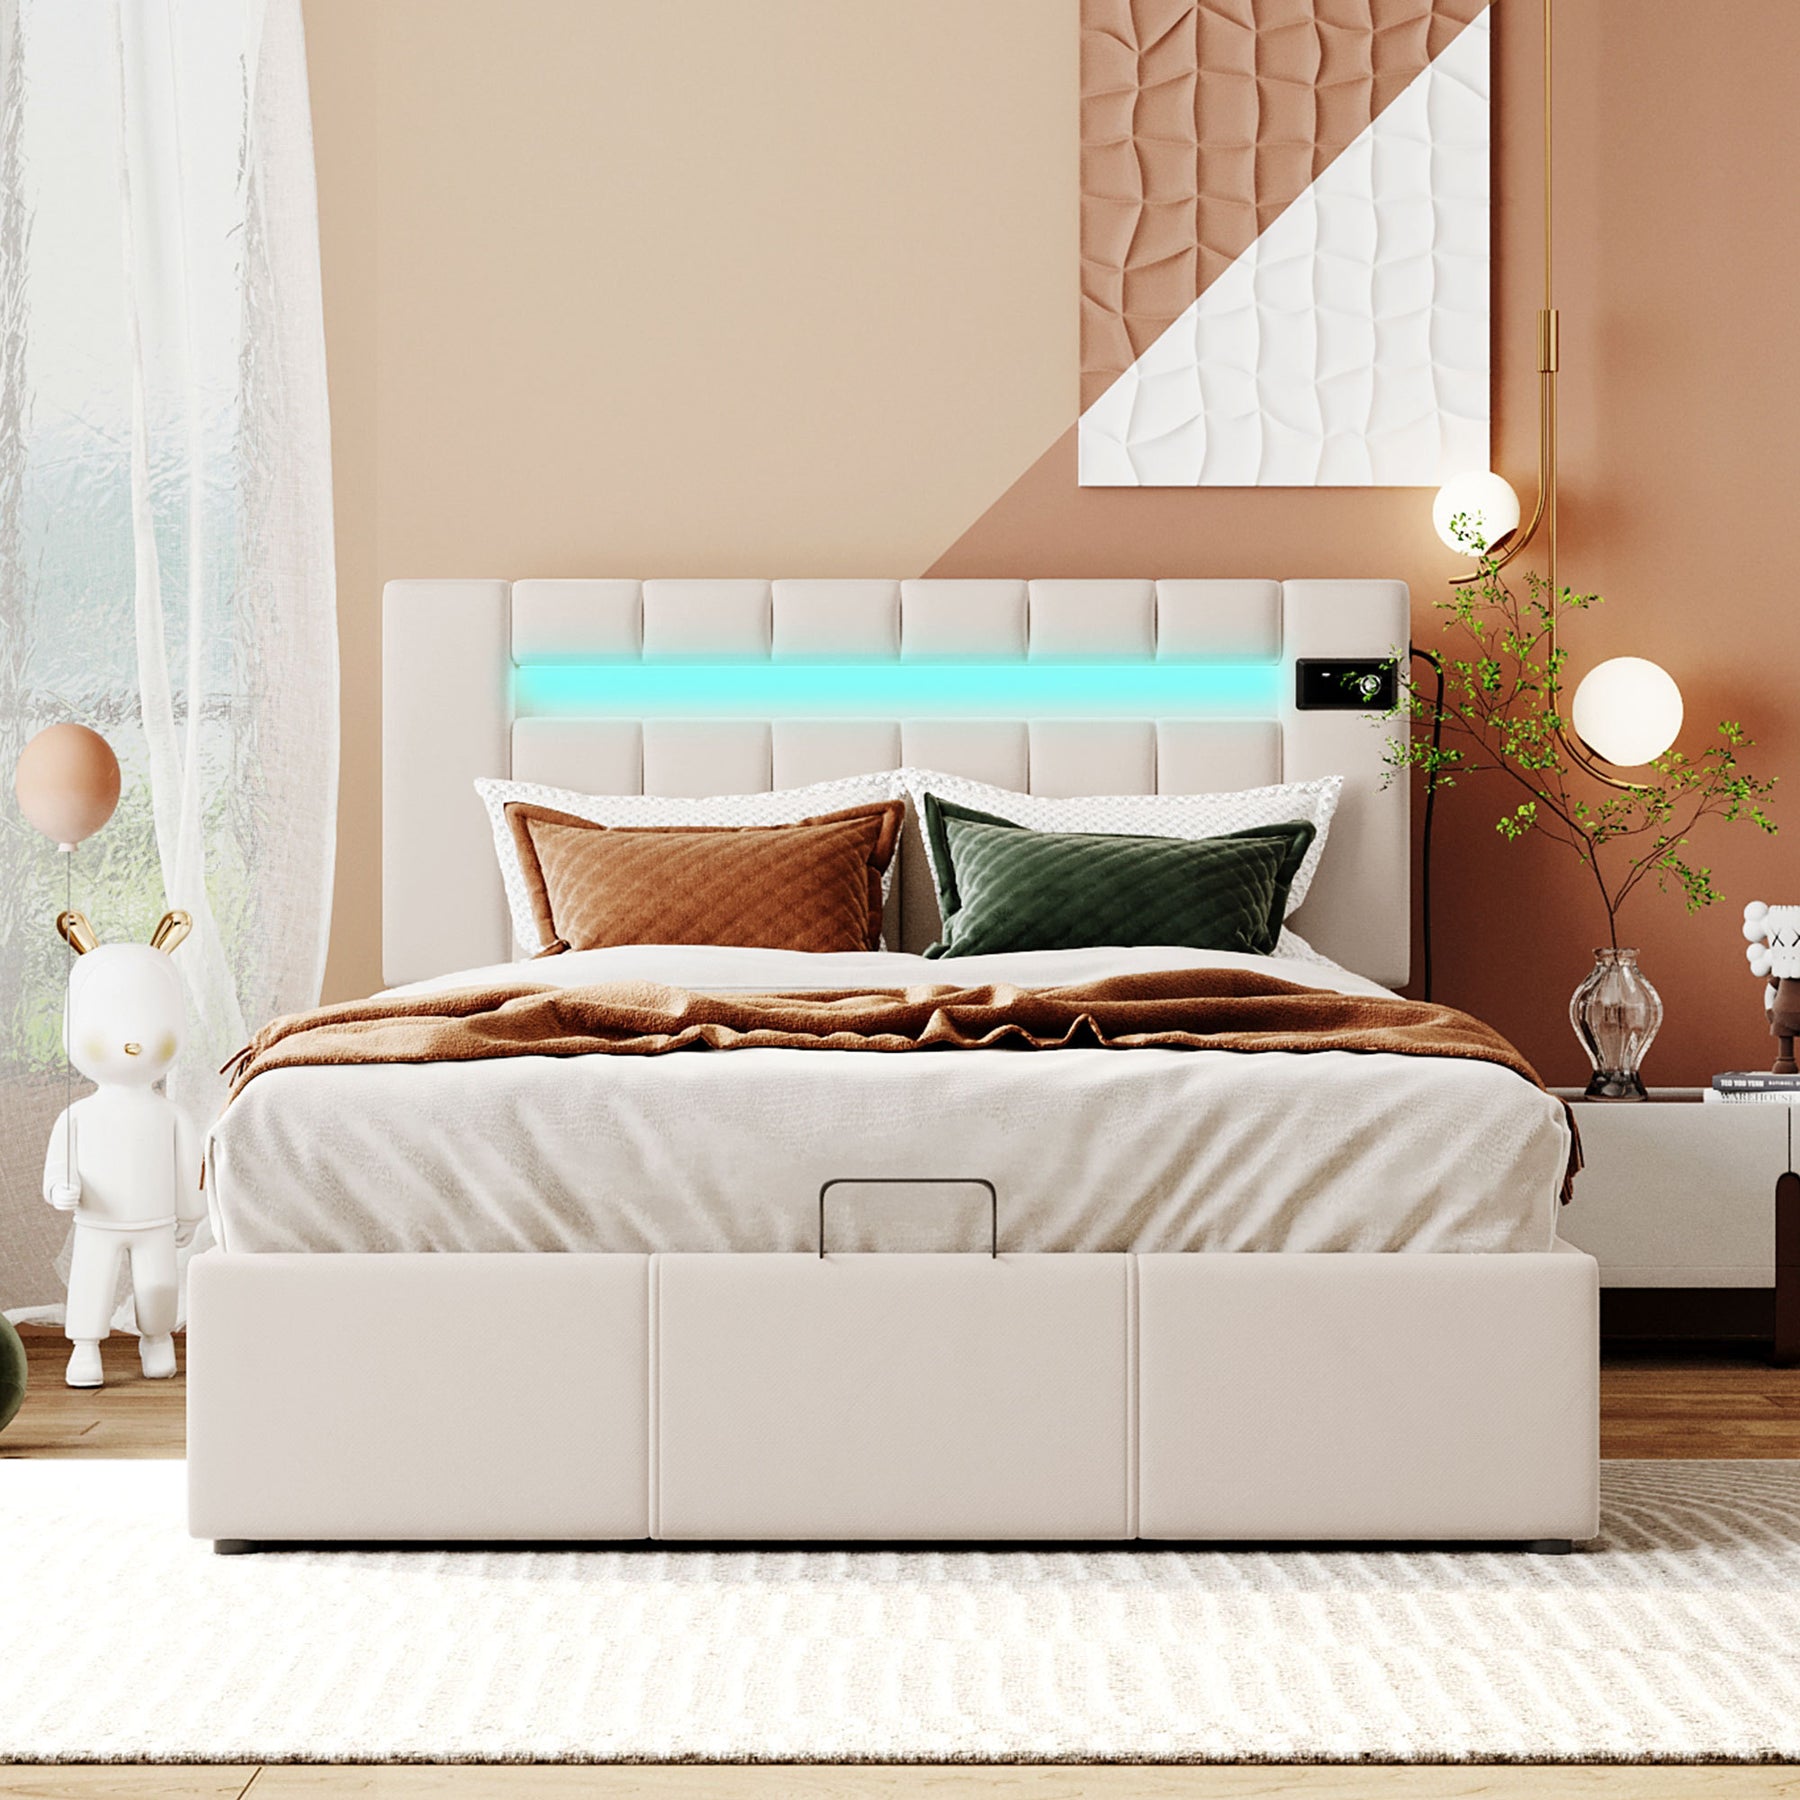 Upholstered Bed Full Size with LED light, Bluetooth Player and USB Charging, Hydraulic Storage Bed in Beige Velvet Fabric - Tonkn